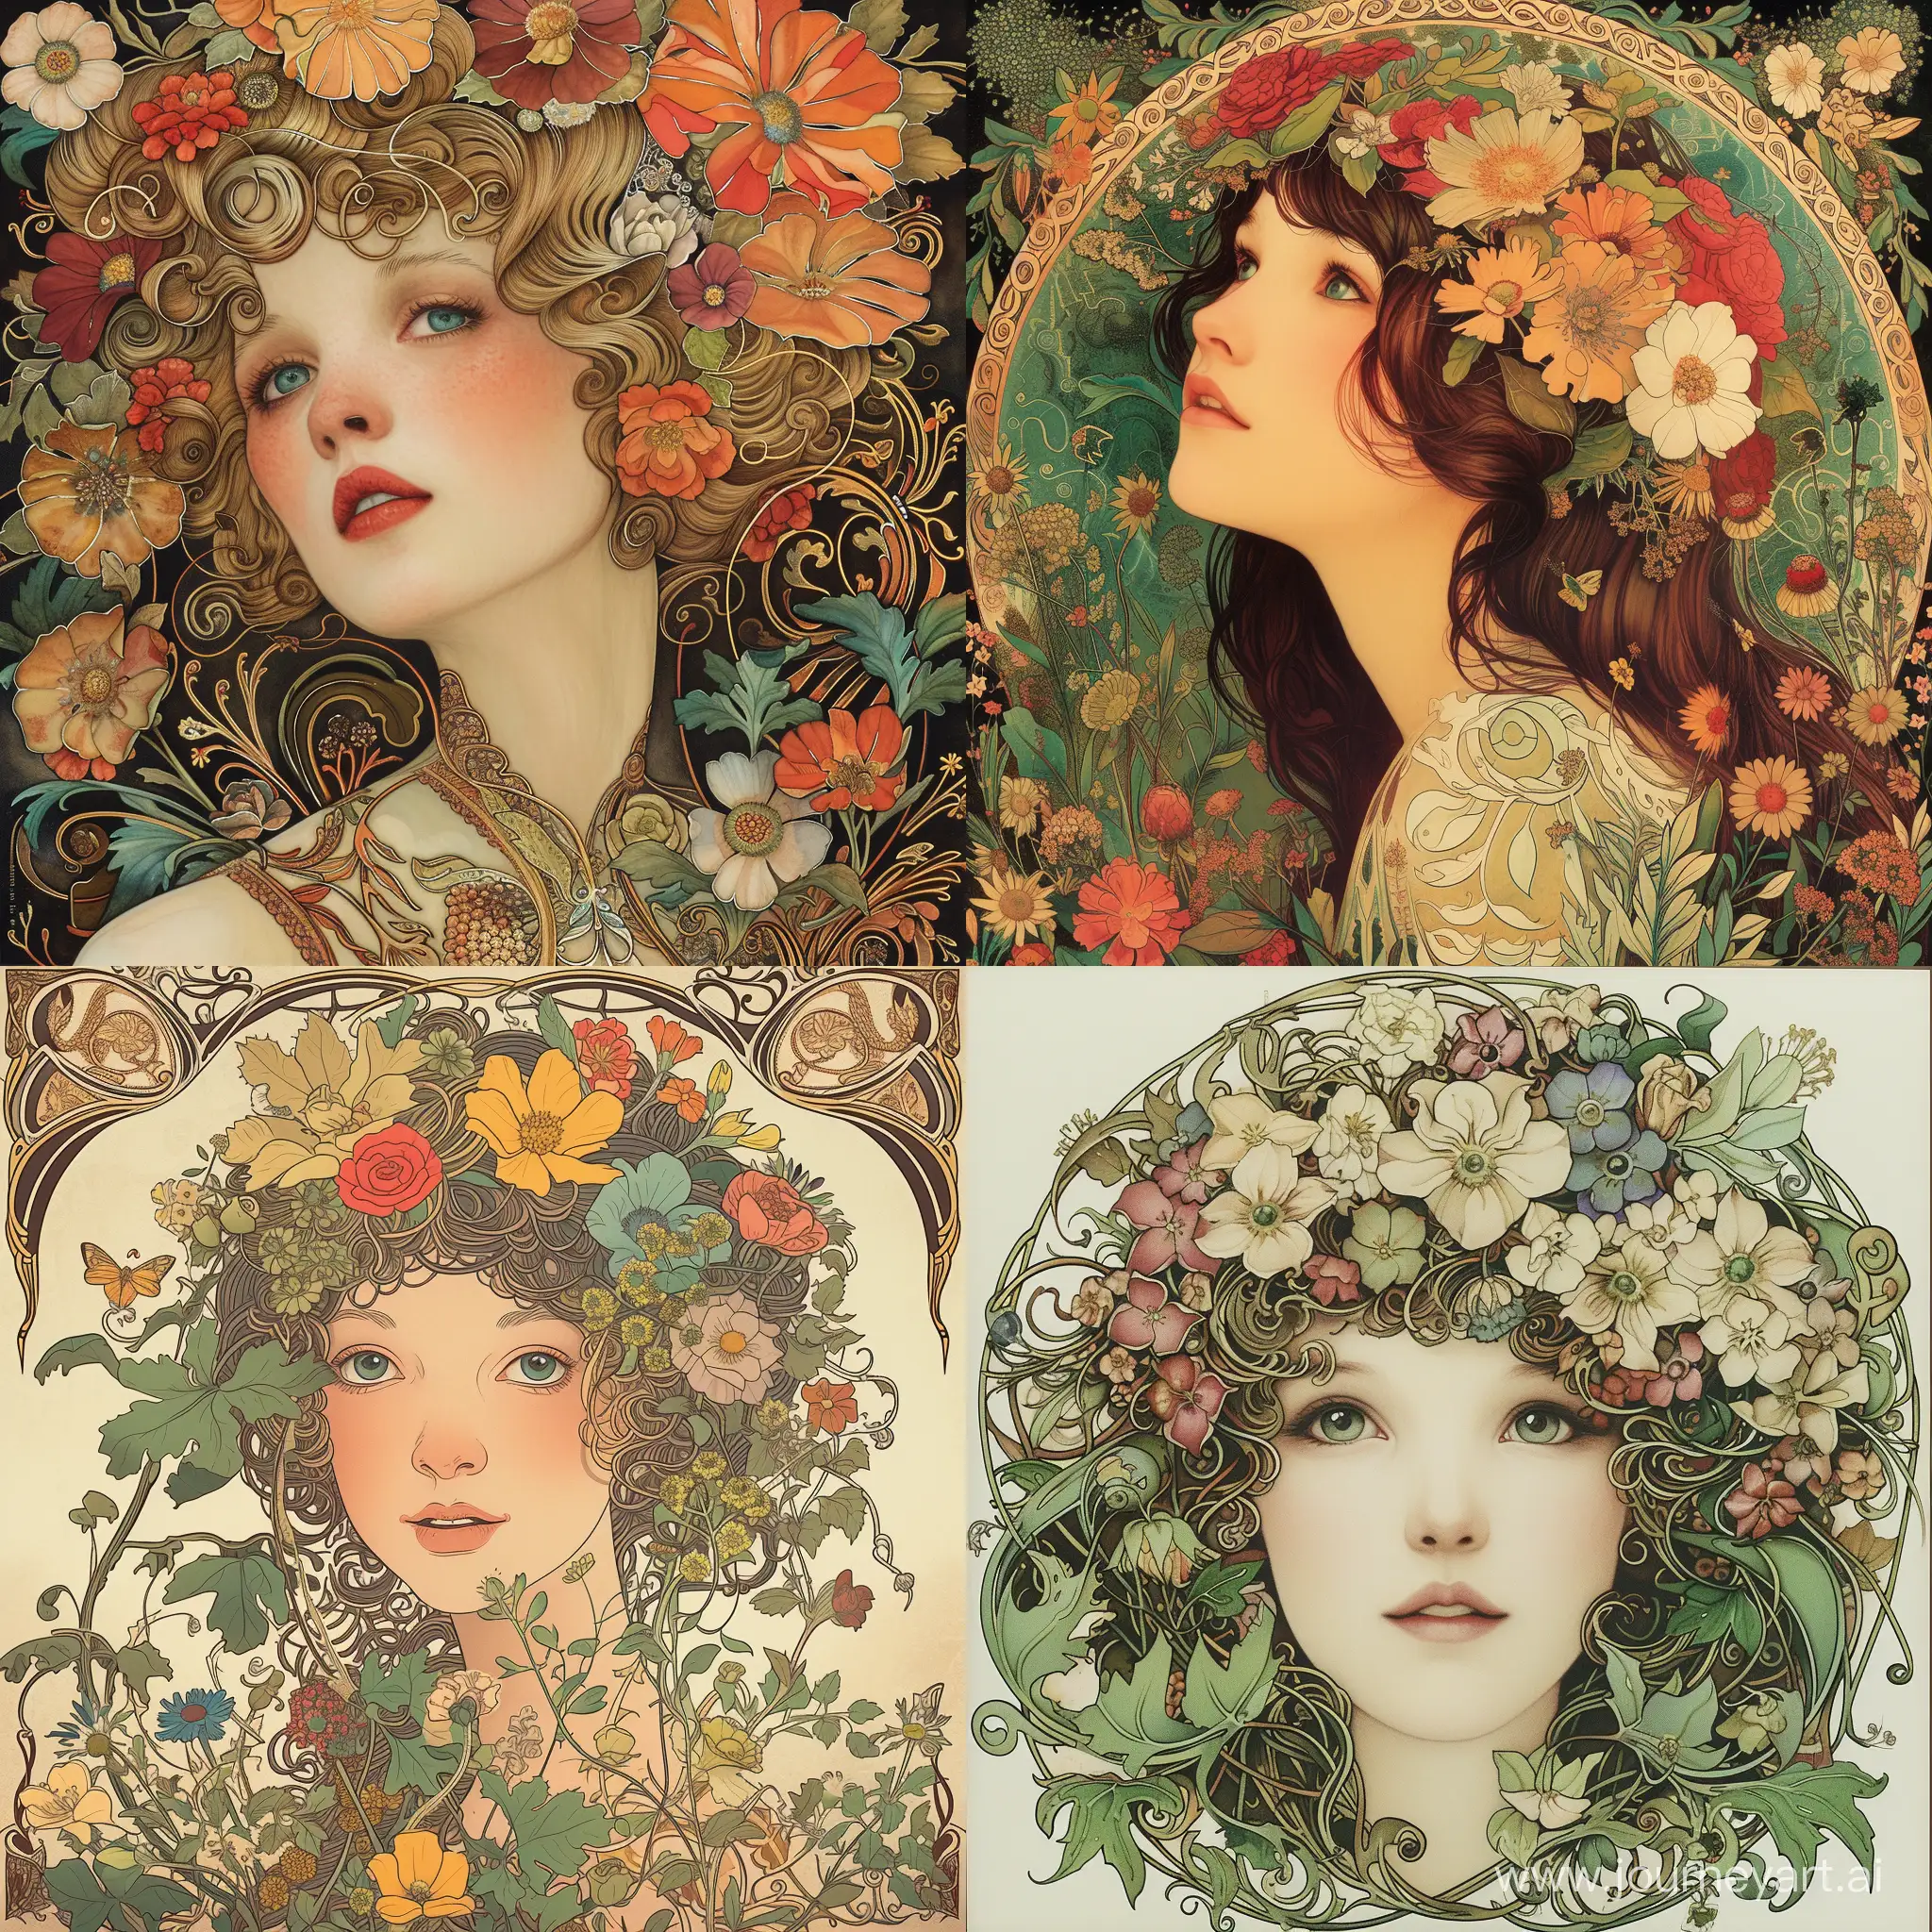 Art-Nouveau-Figures-Surrounded-by-Flourishing-Florals-and-Intricate-Motifs